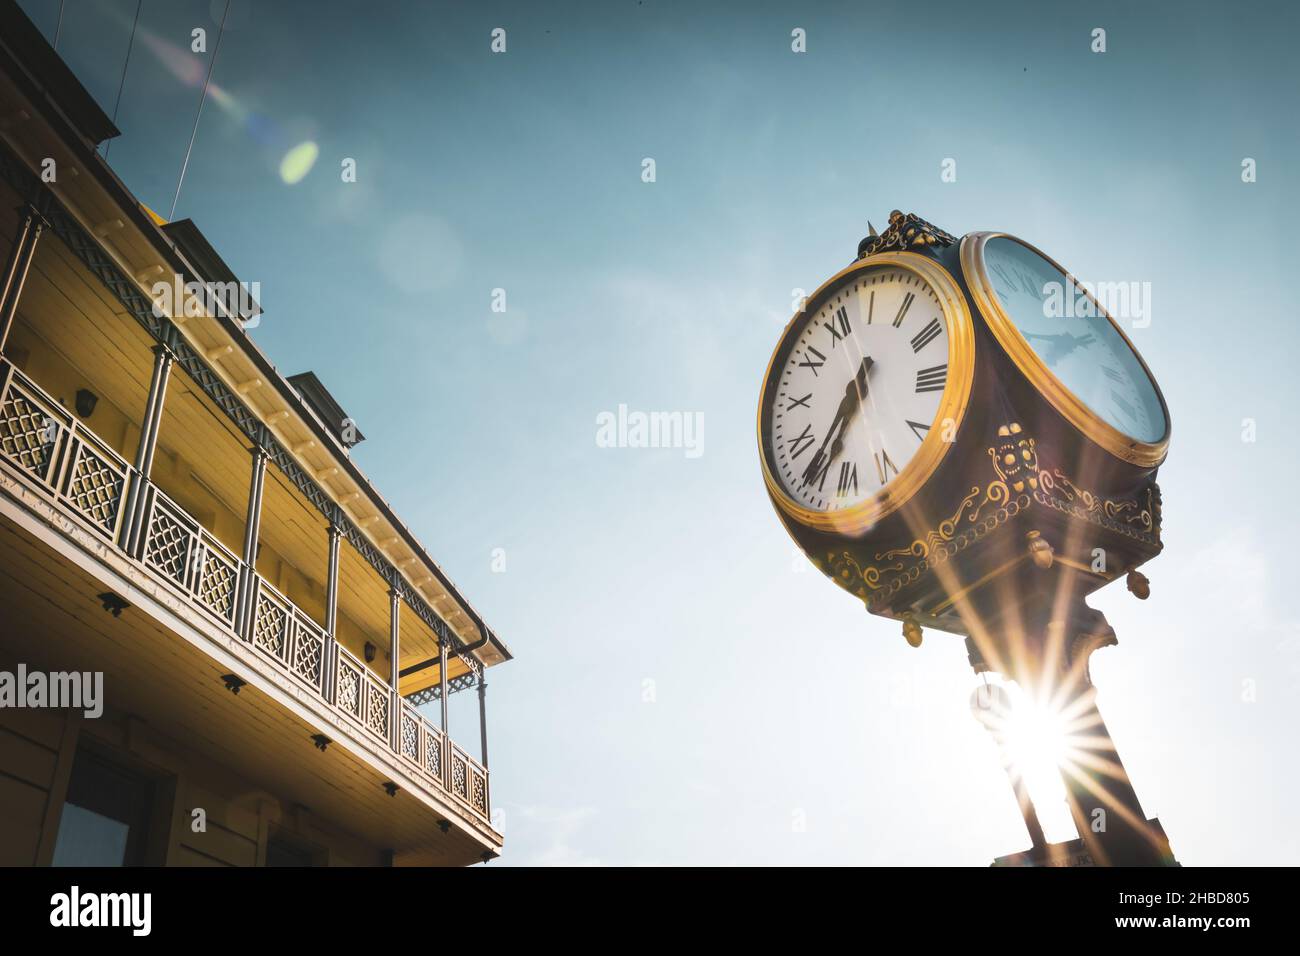 Old golden vintage clock with greek numbers, sunflare, building and blue sky in the background. Old town in Tbilisi. Georgia. 2020 Stock Photo